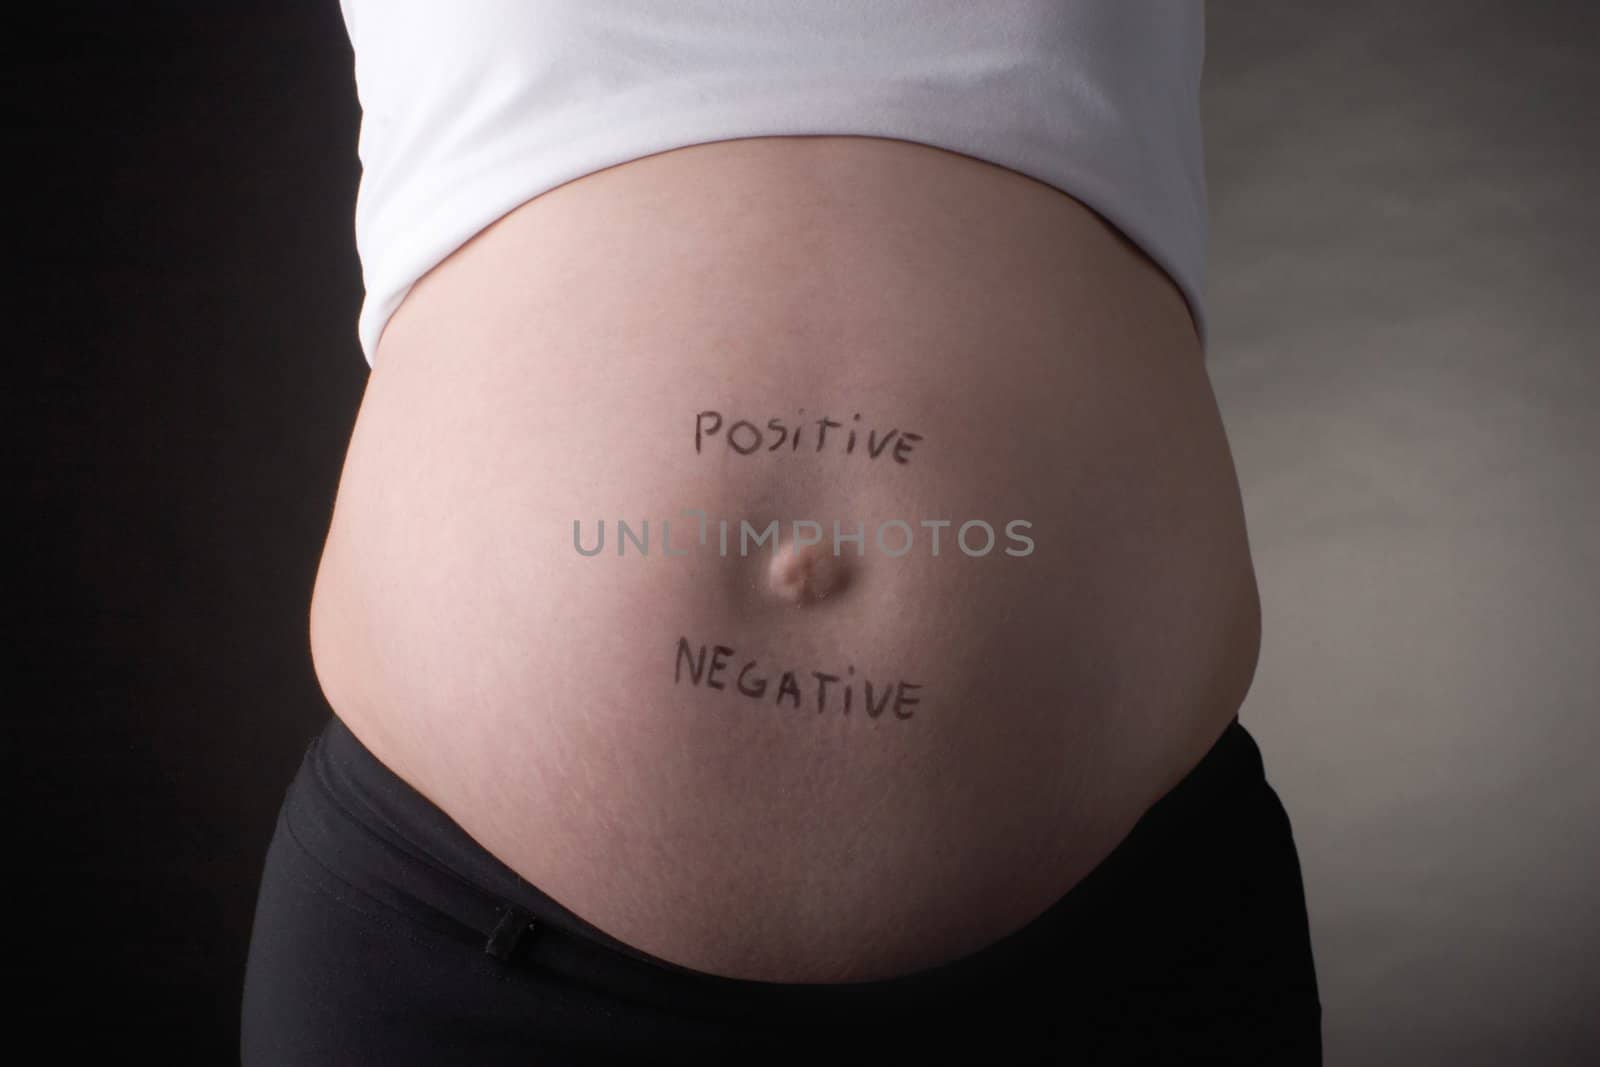 seven month pregnant belly with positive and negative written on stomach